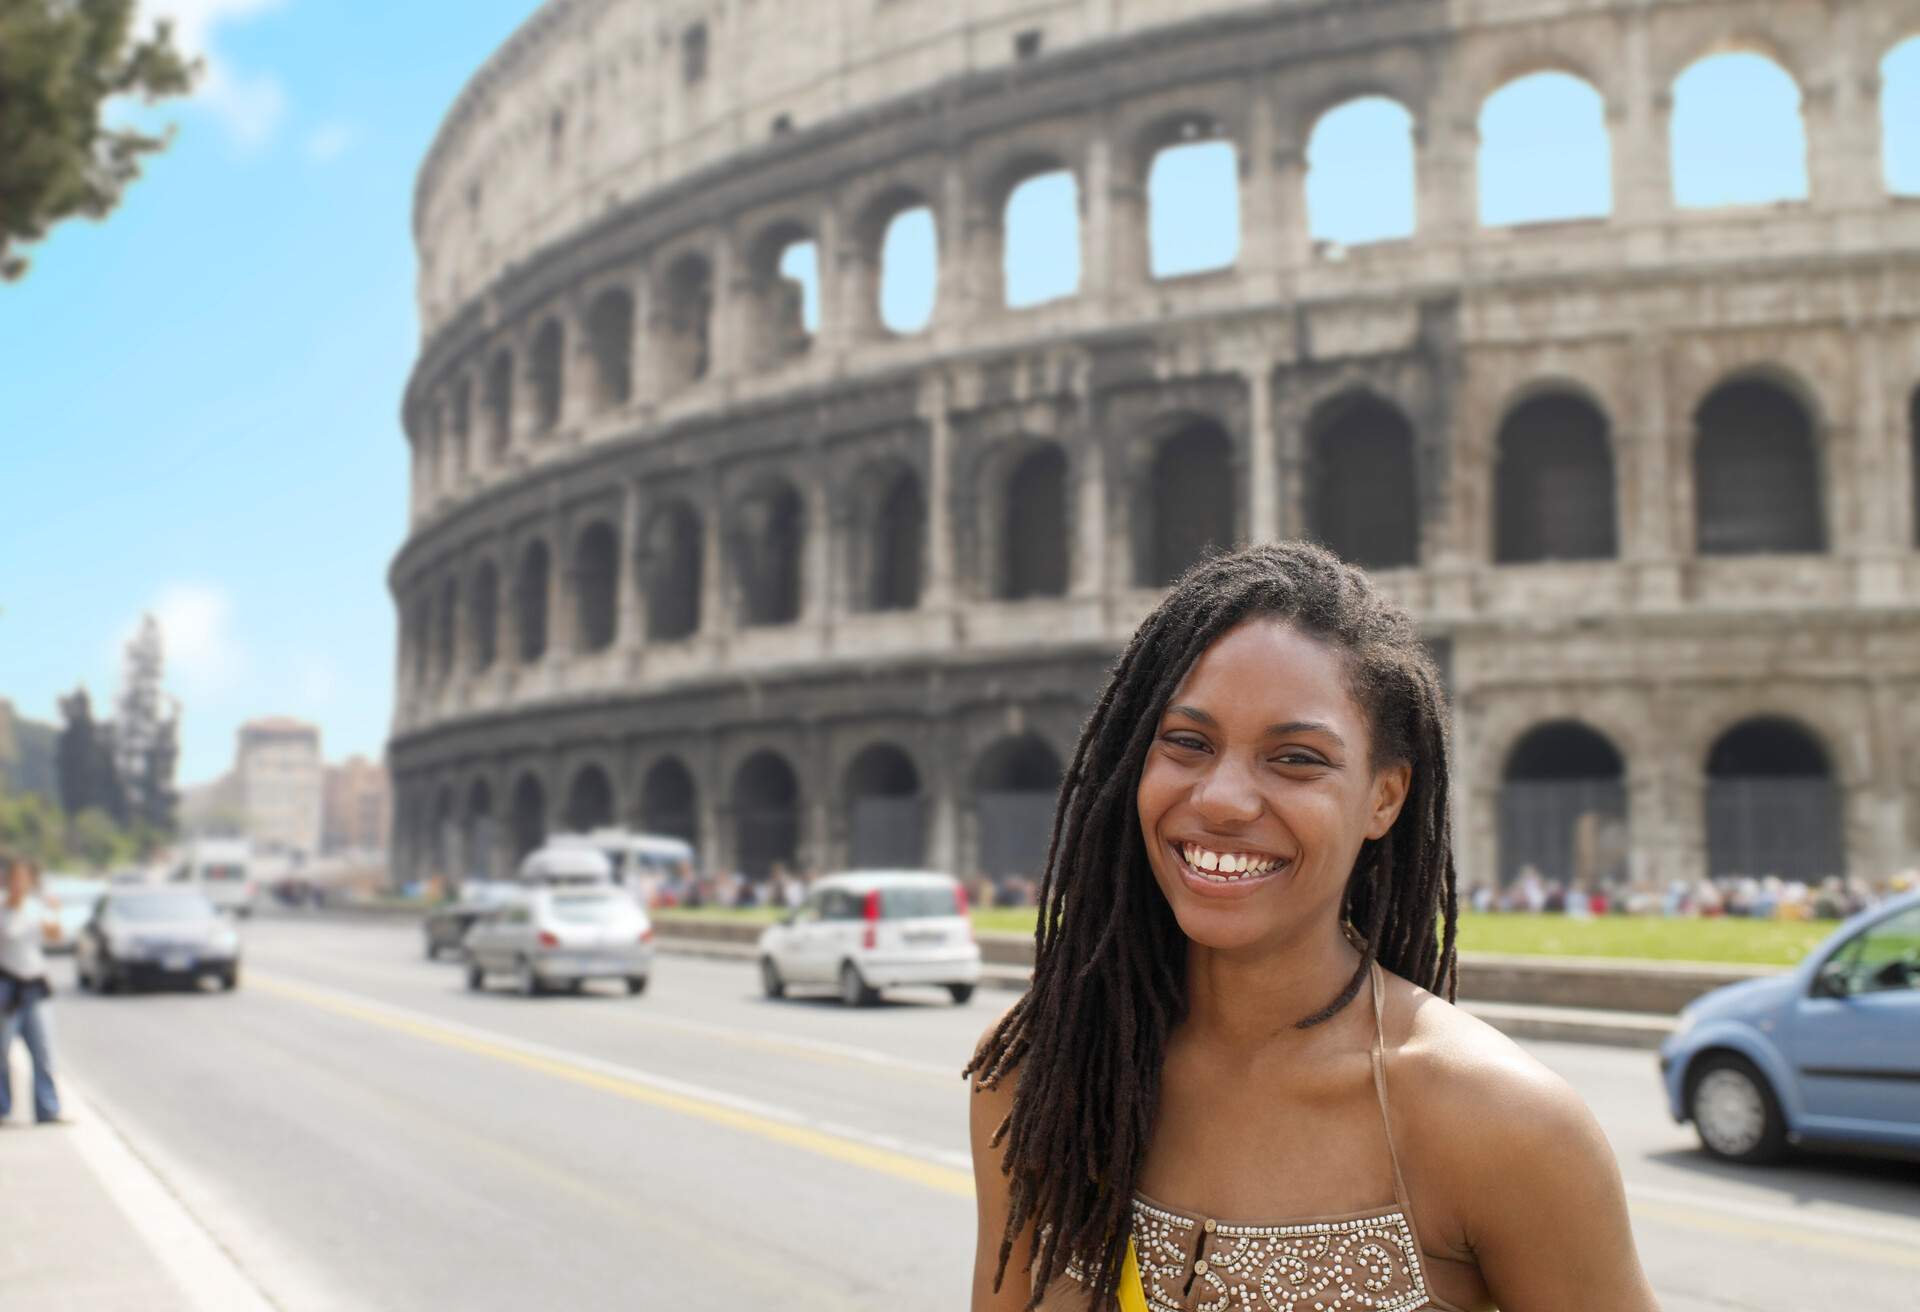 A young lady smiles at the camera with a background of the external arch walls of the ancient Colosseum.